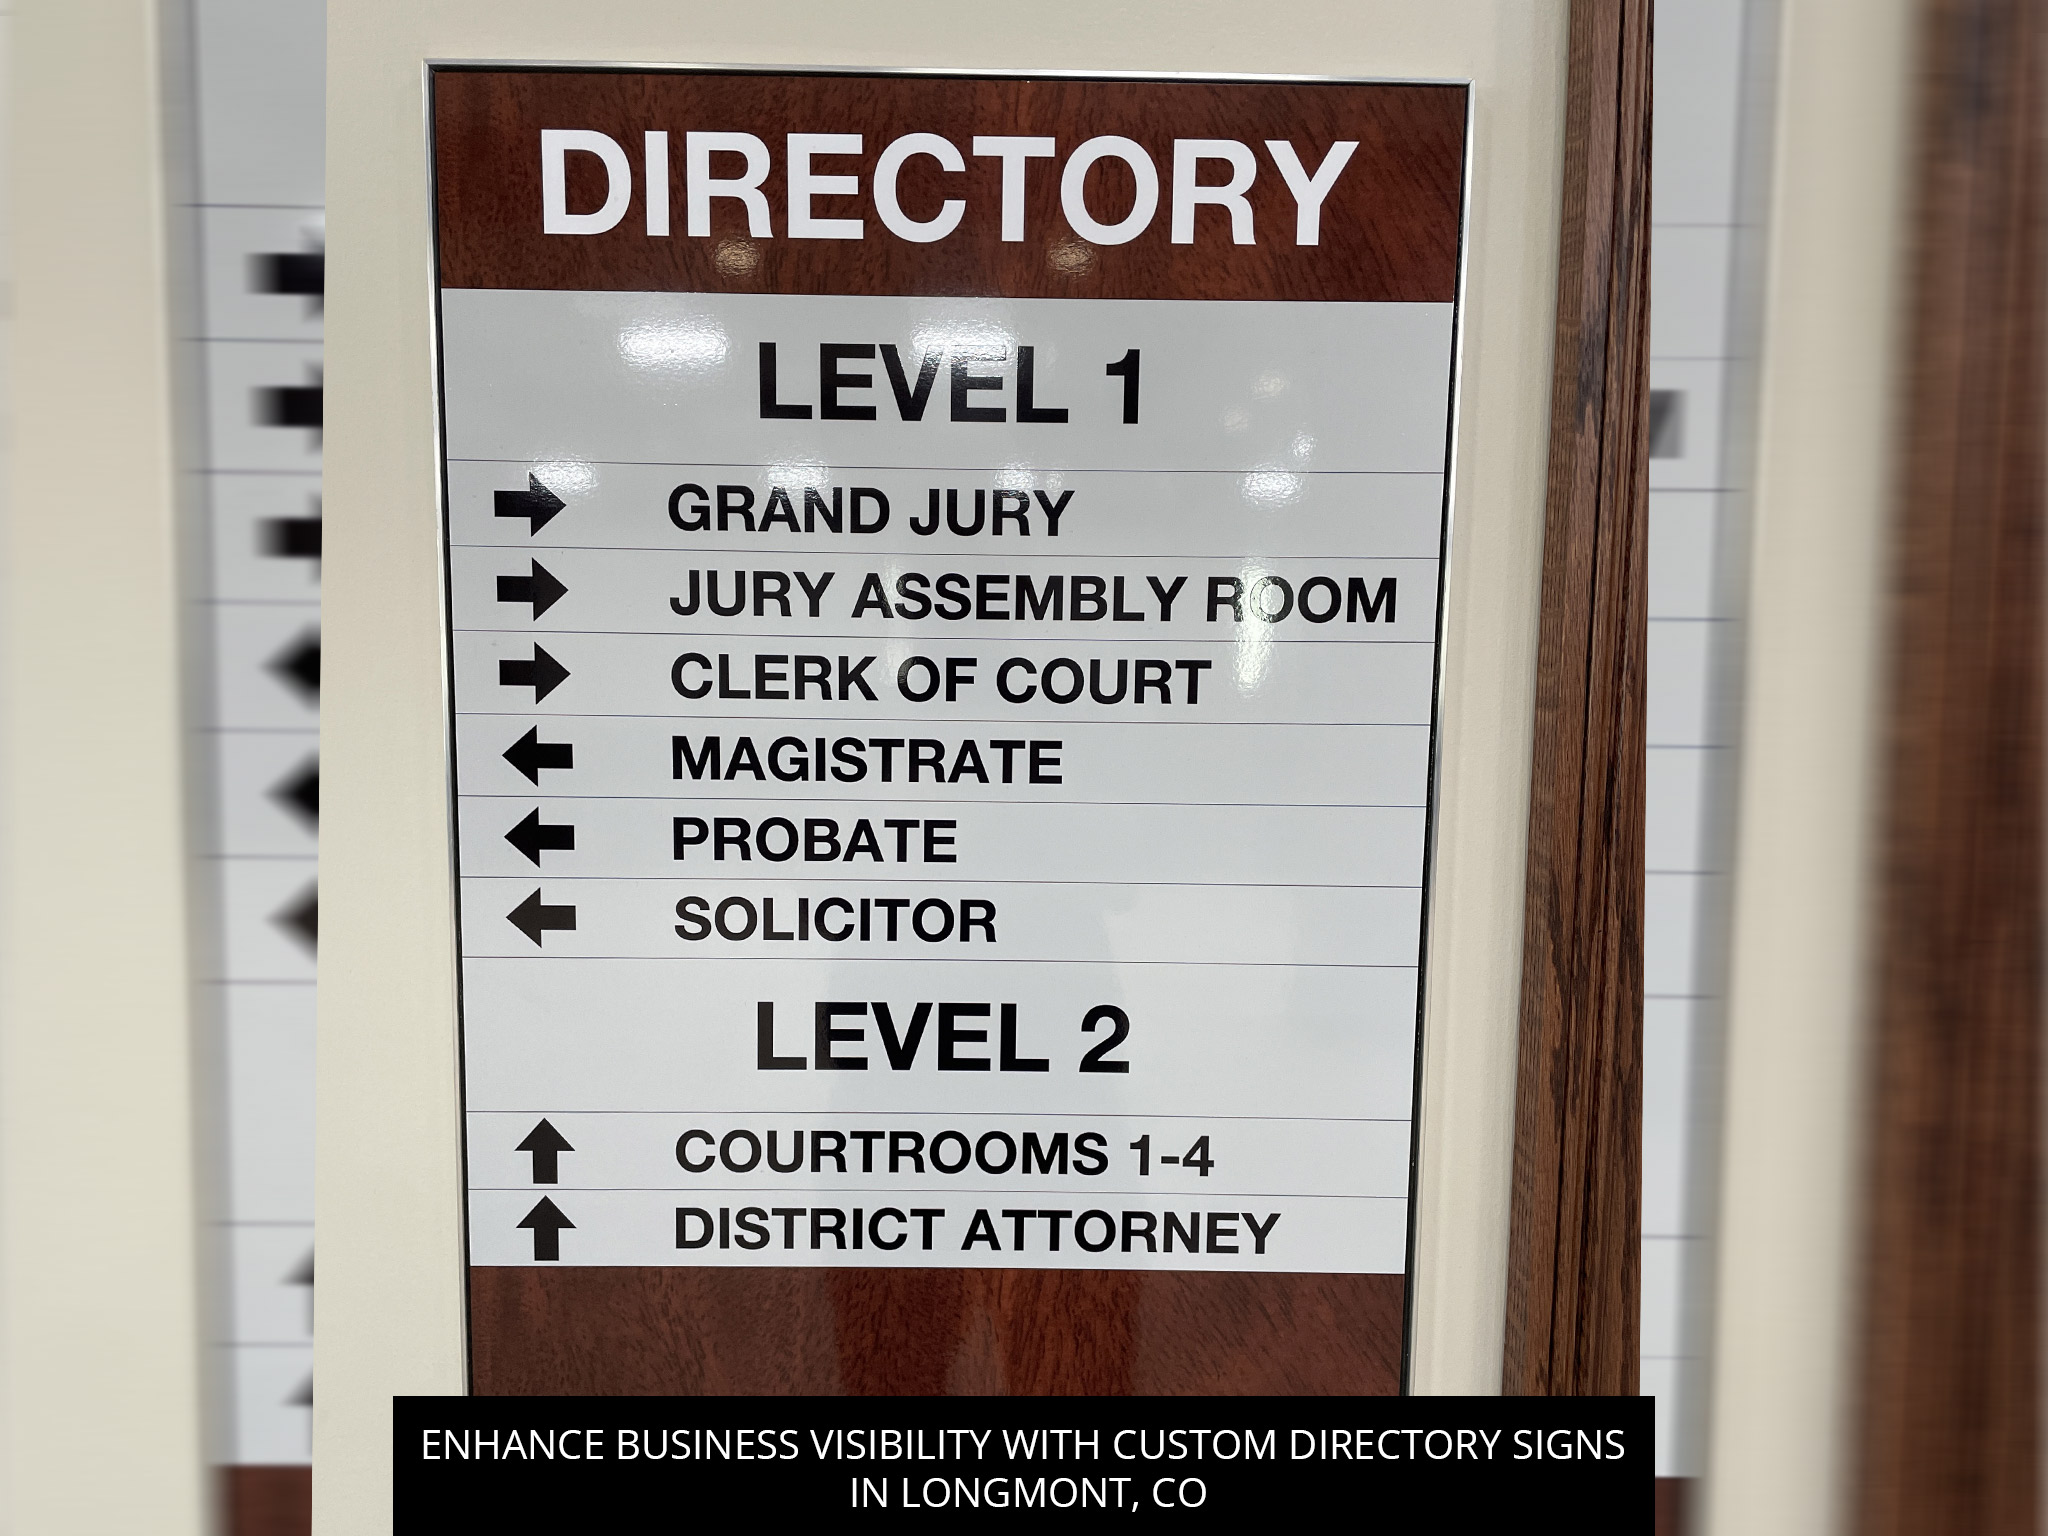 Enhance Business Visibility with Custom Directory Signs in Longmont, CO